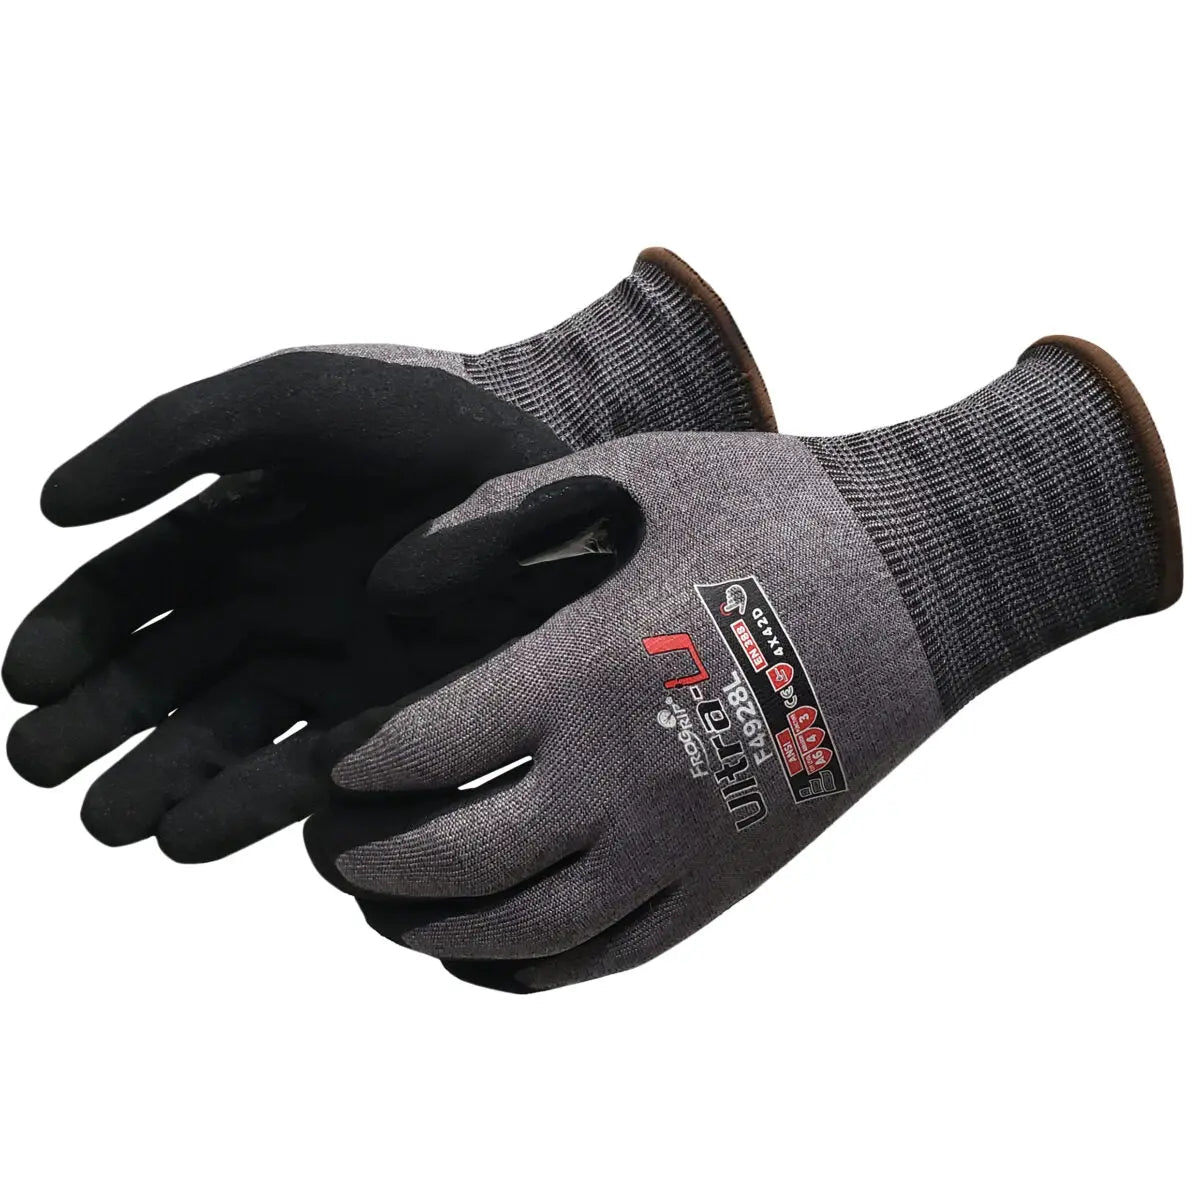 LIBERTY - 18 GUAGE, CUT A6, BLACK SANDY NITRILE GLOVES  Becker Safety and Supply